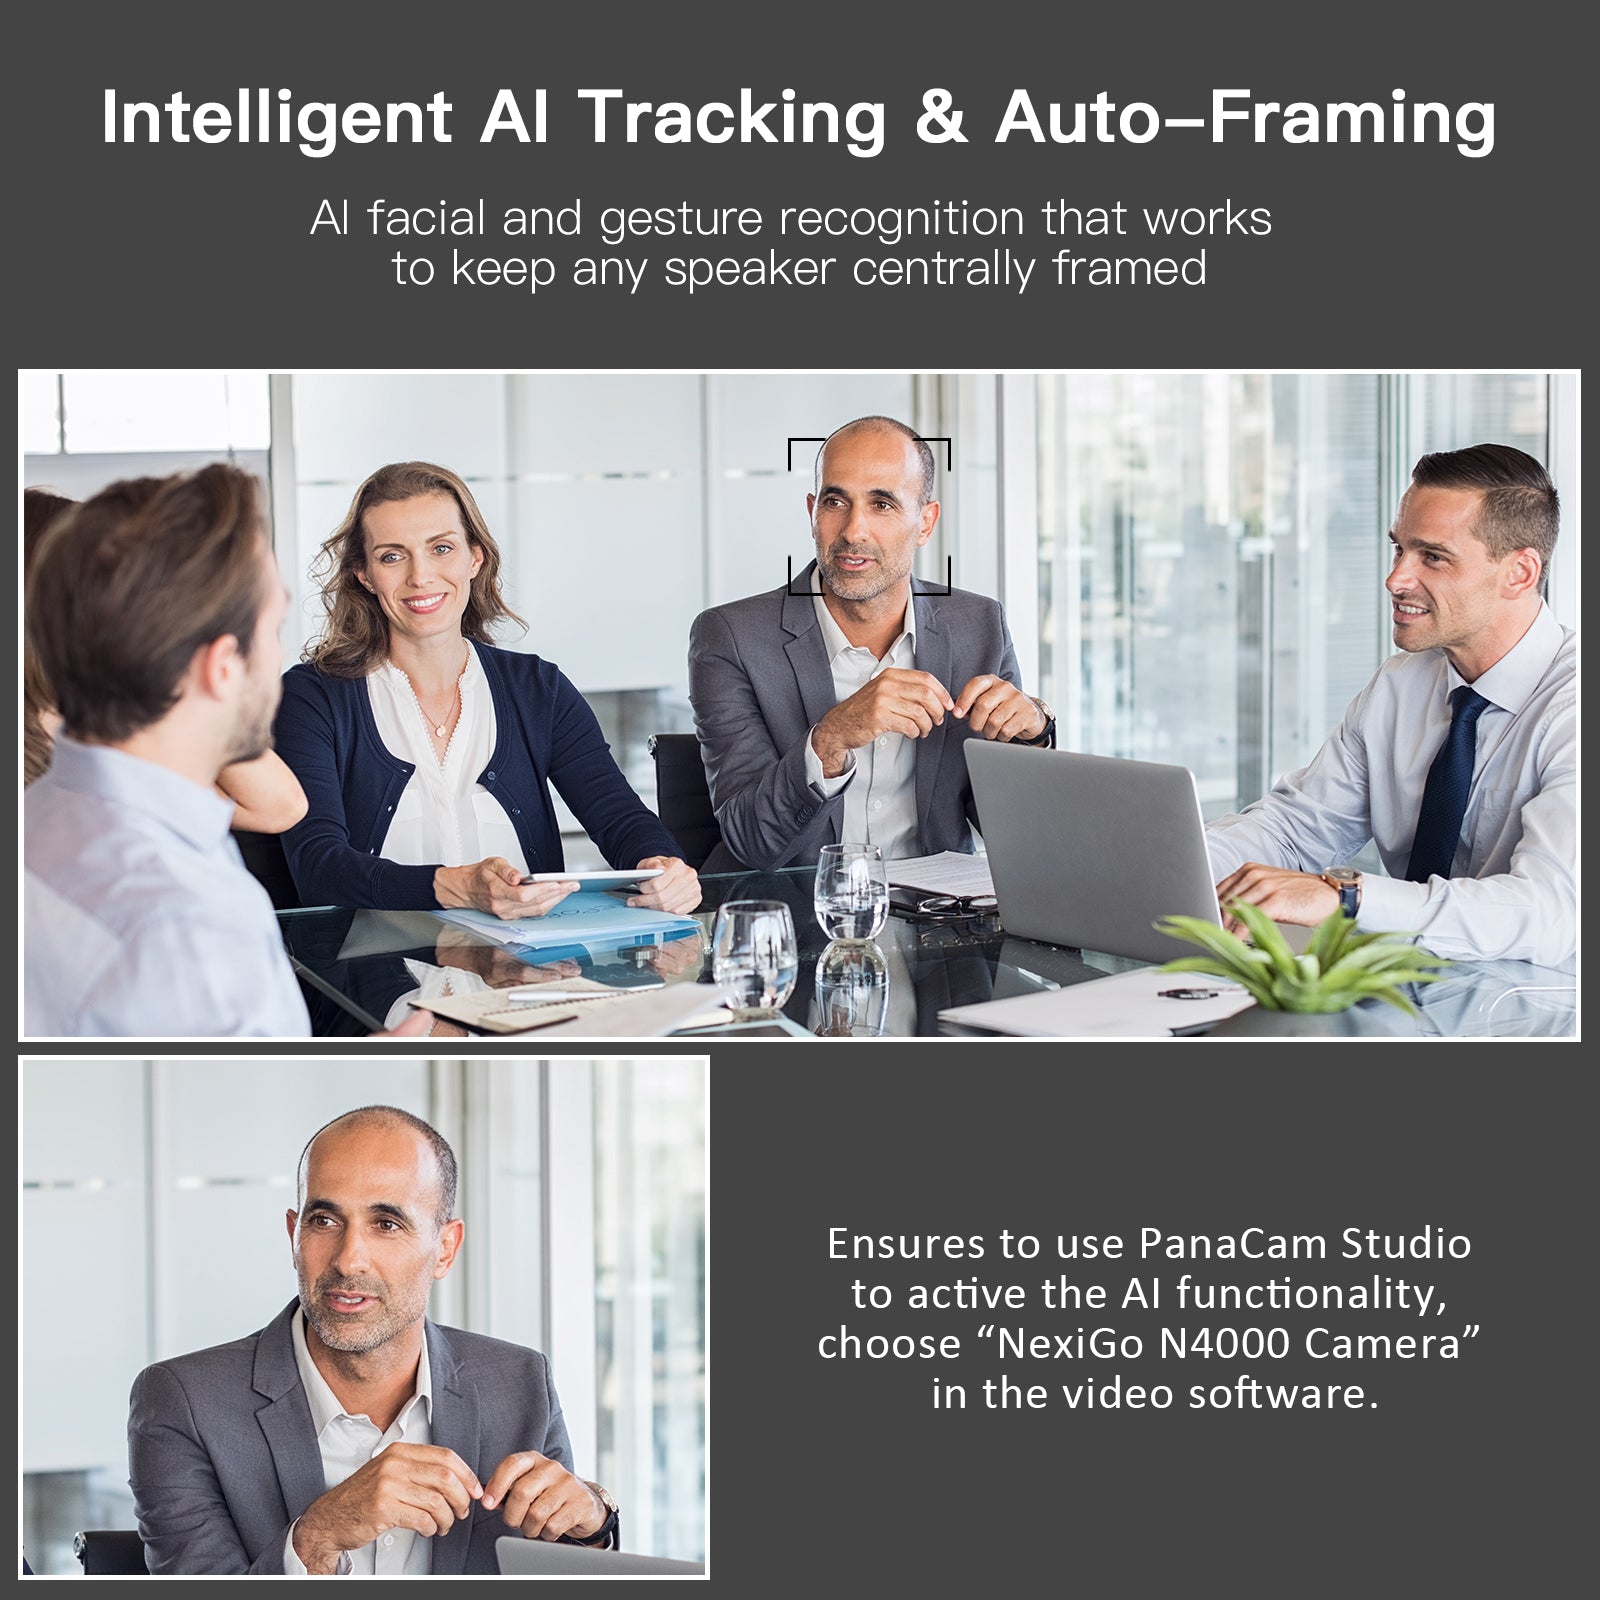 PanaCam features intelligent AI tracking with auto-framing